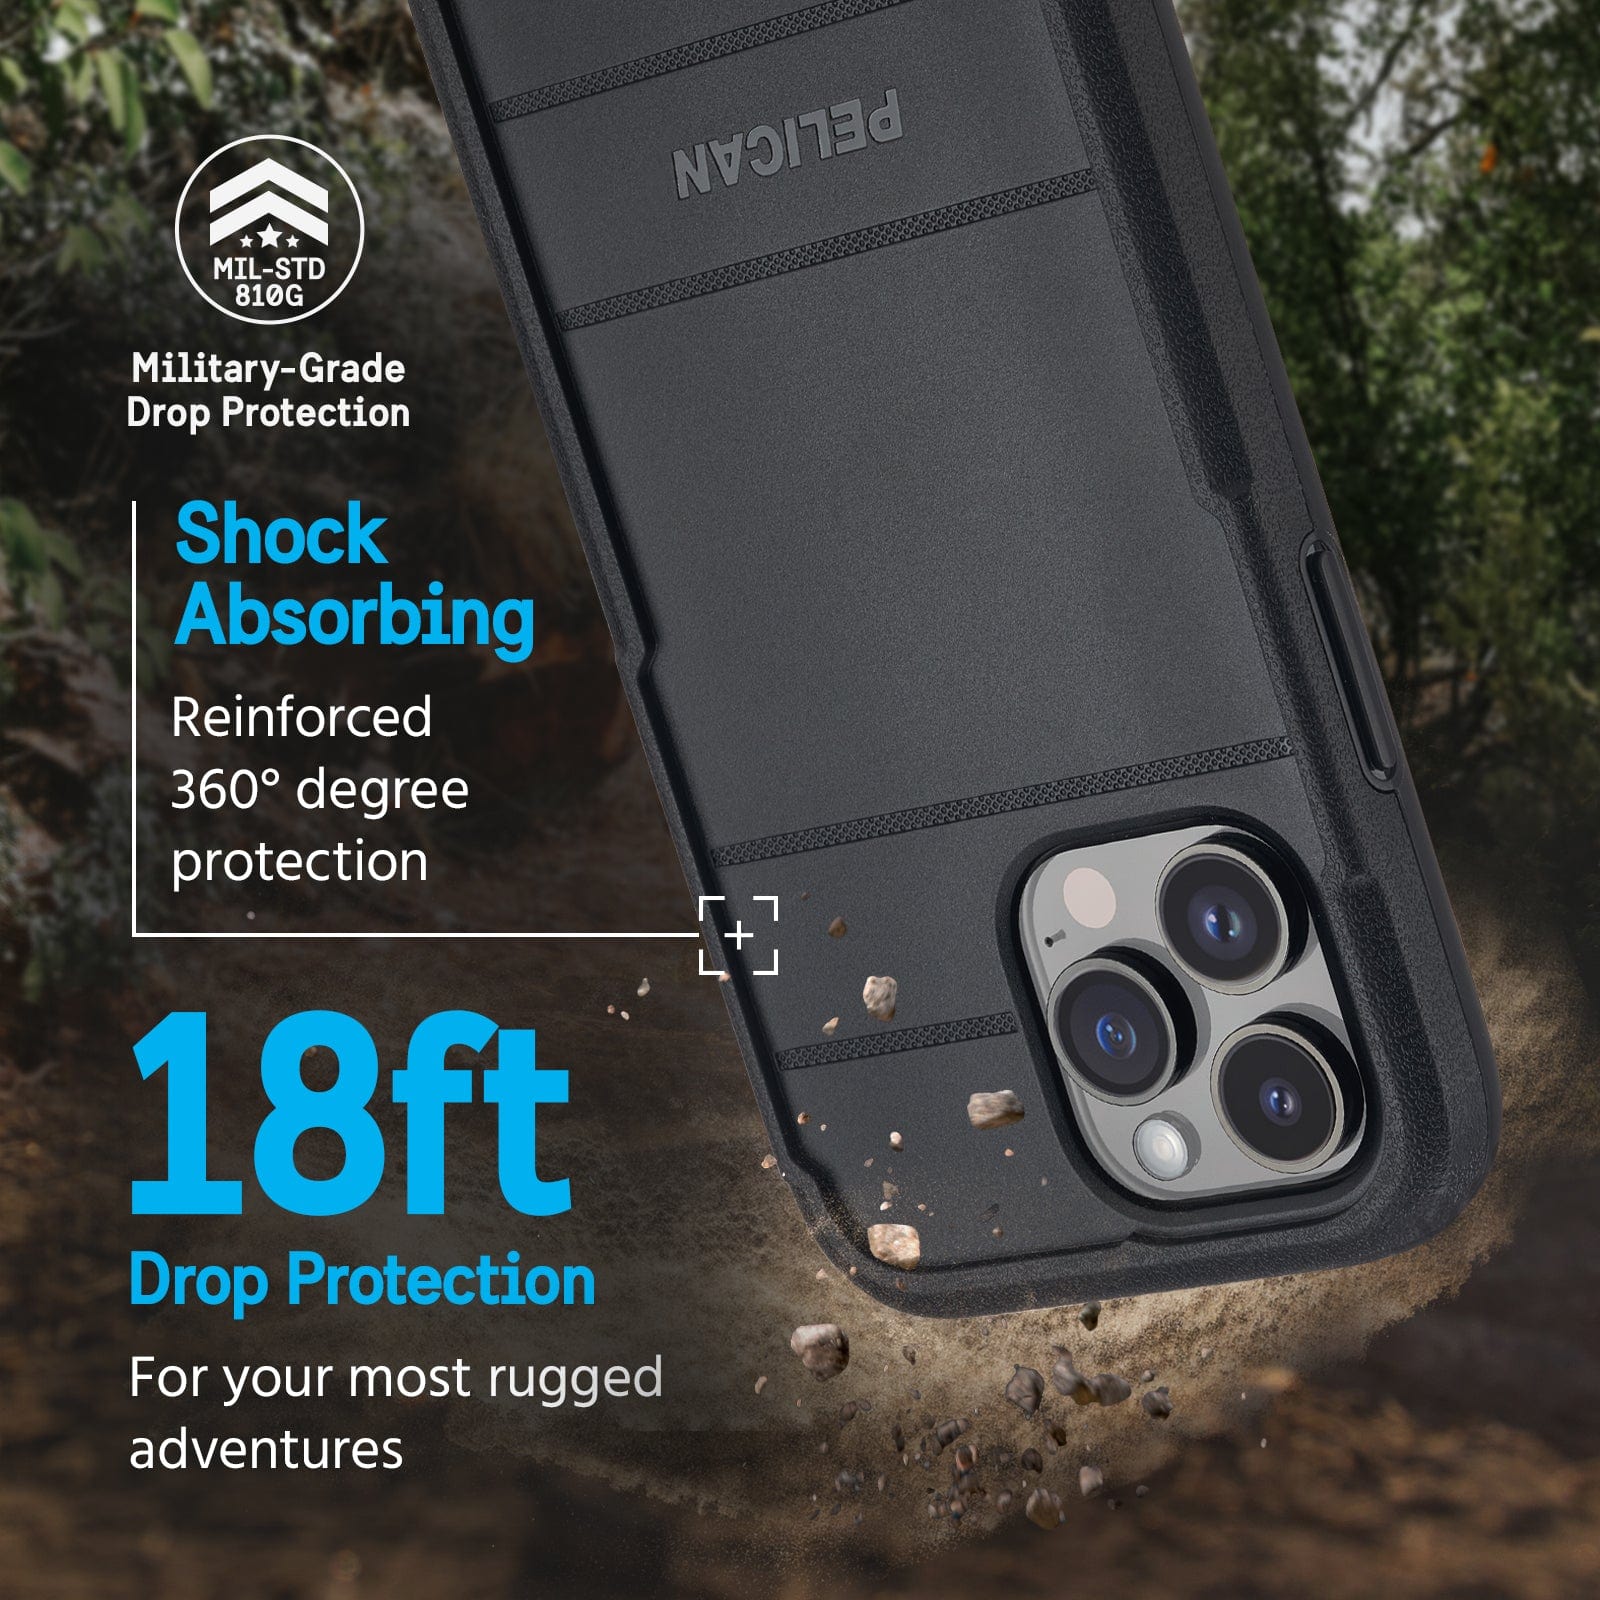 shock absorbing reinforced 360 degree protection. 18ft drop protection for your most rugged adventures